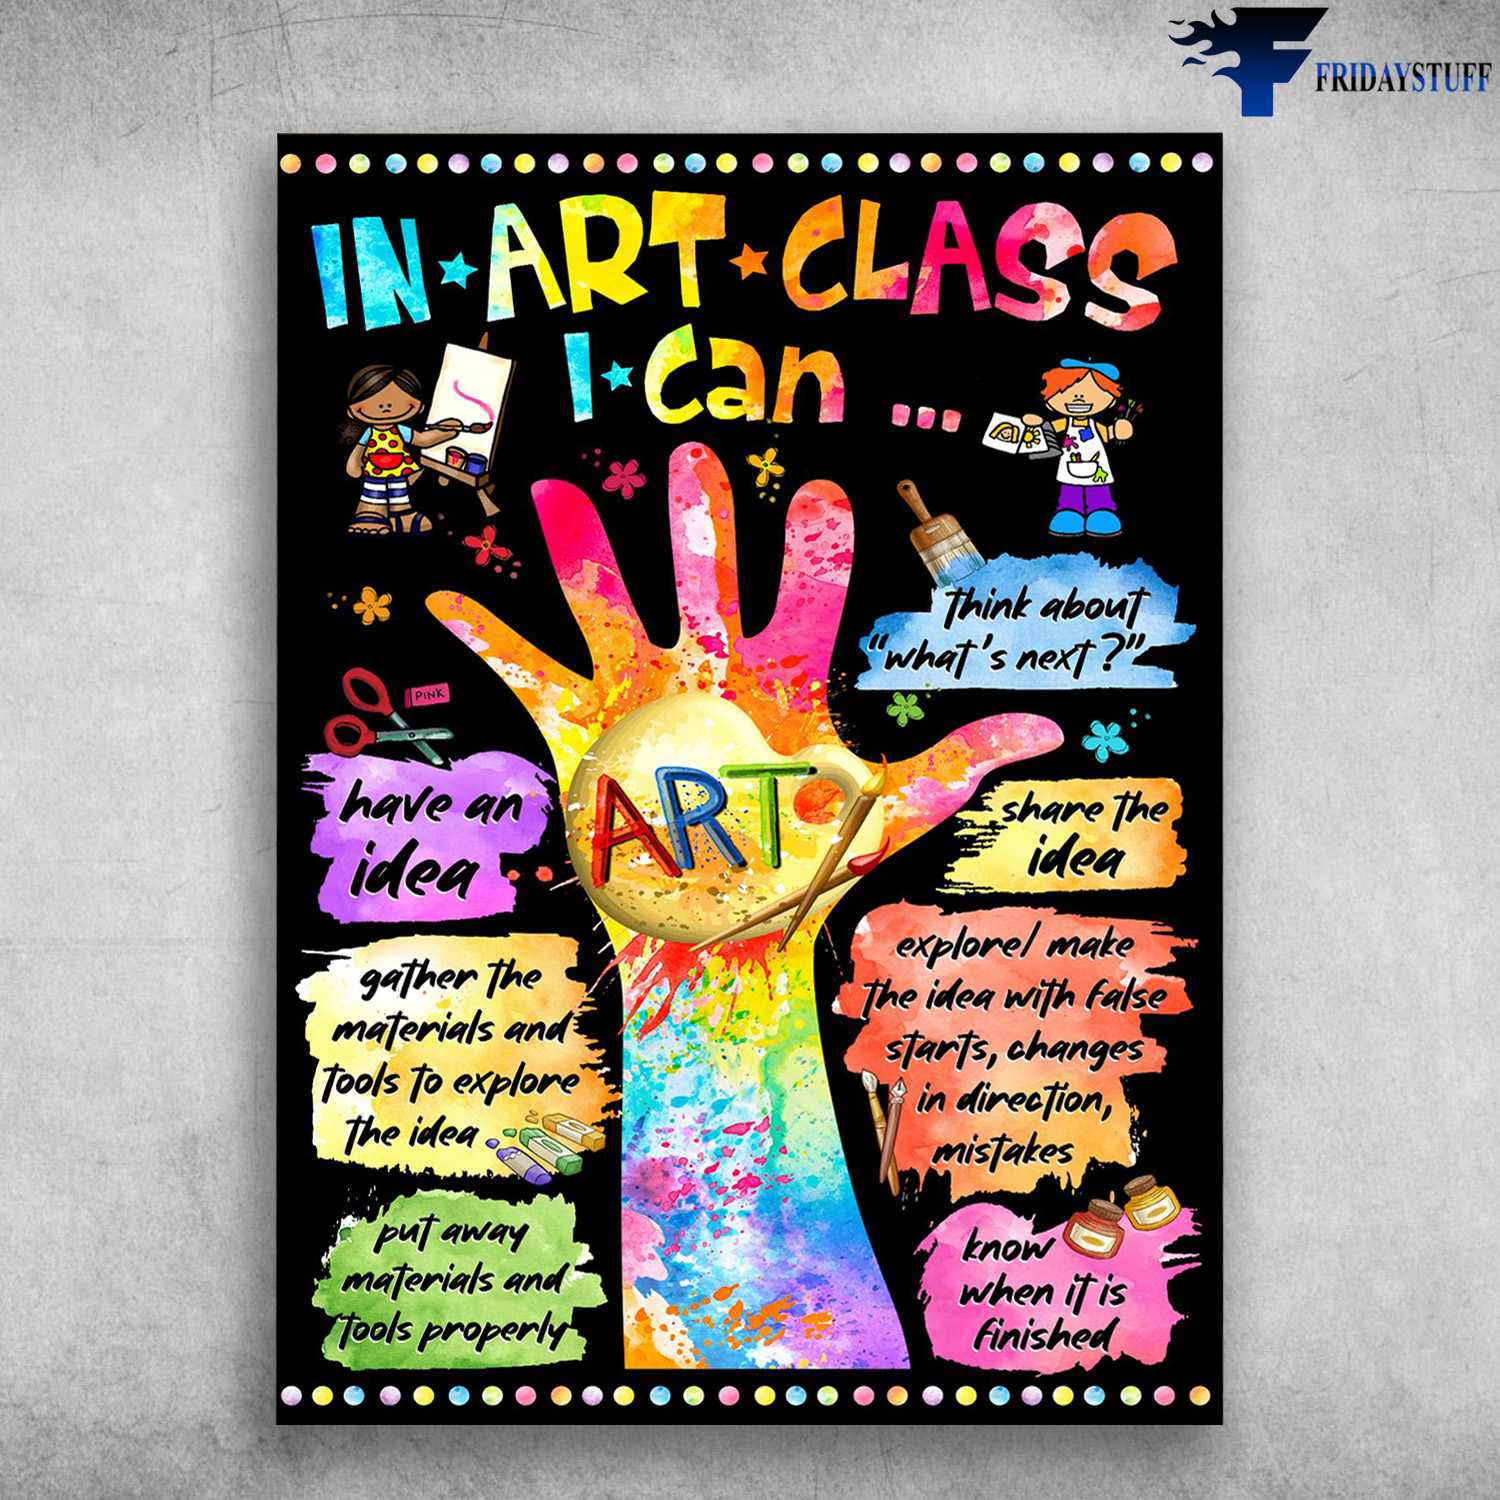 Art Class, Classroom Poster, In Art Class, I Can Have An Idea, Think About What's Next, Share The Idea,Know When It Is Finished